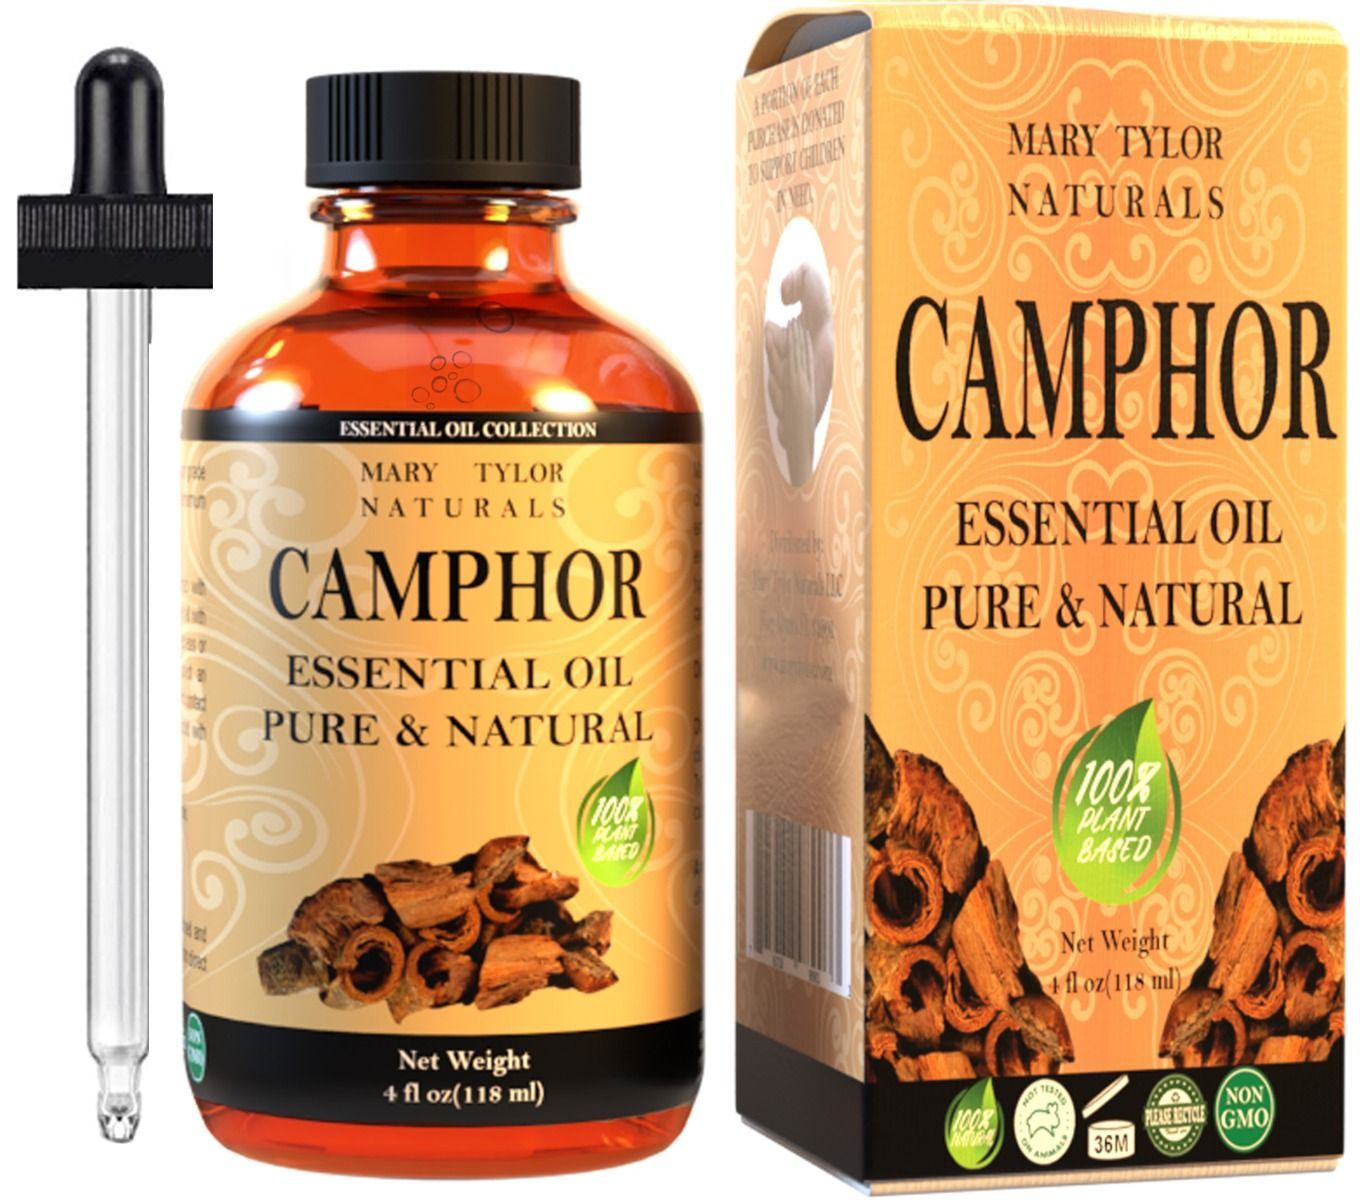 Sun Essential Oils - Camphor Essential Oil - 4 Fluid Ounces (Pack Of 1) -  Imported Products from USA - iBhejo